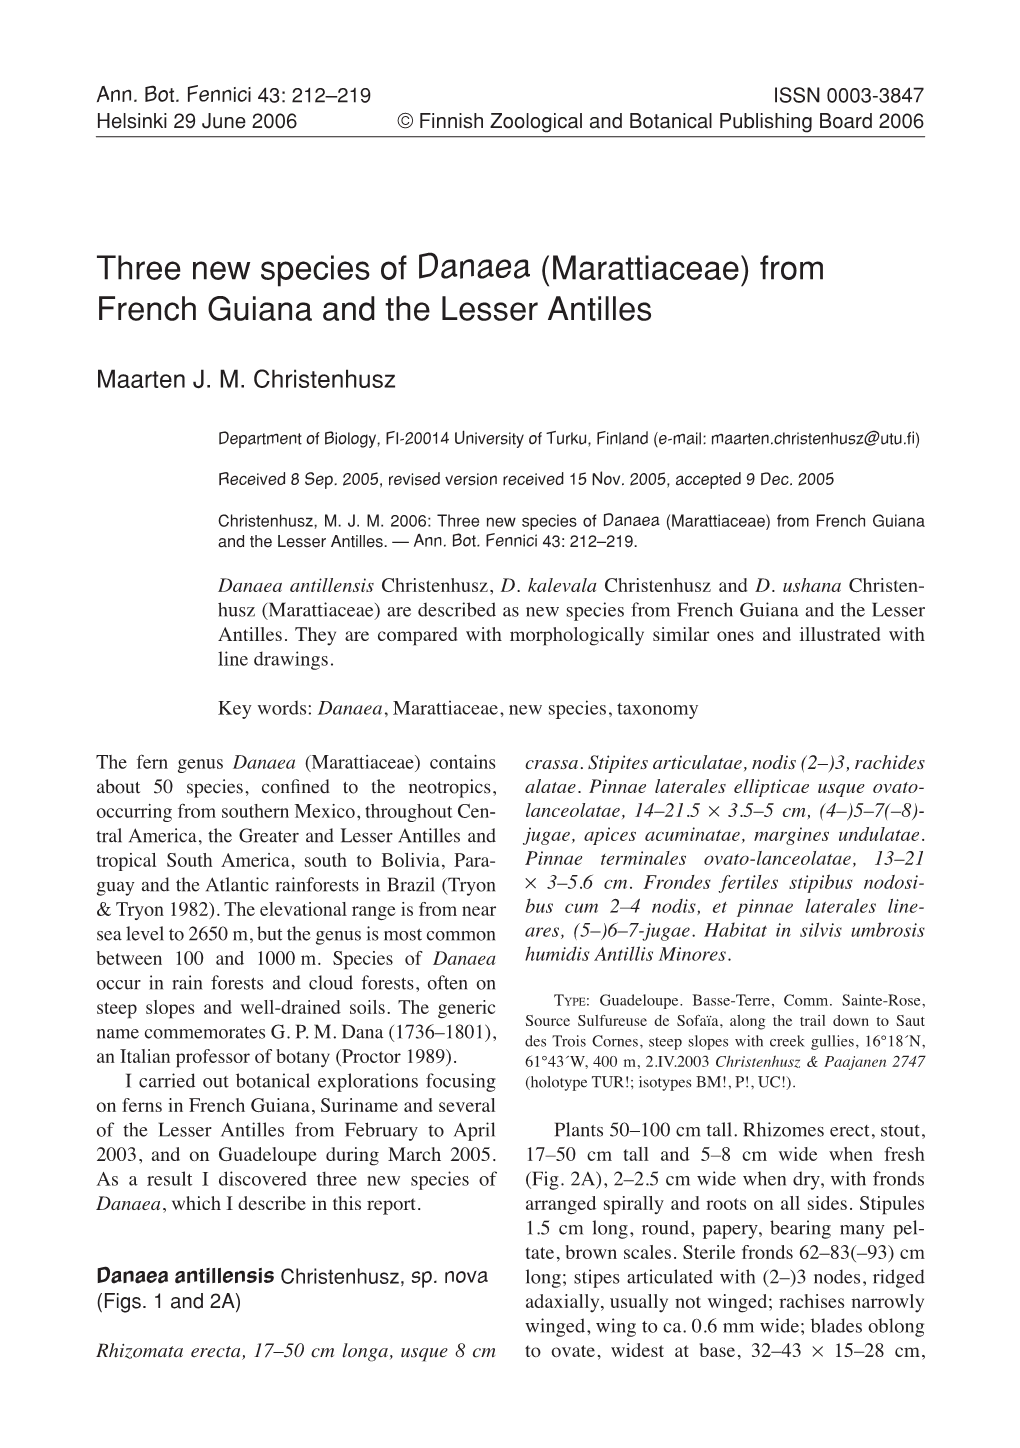 Three New Species of Danaea (Marattiaceae) from French Guiana and the Lesser Antilles